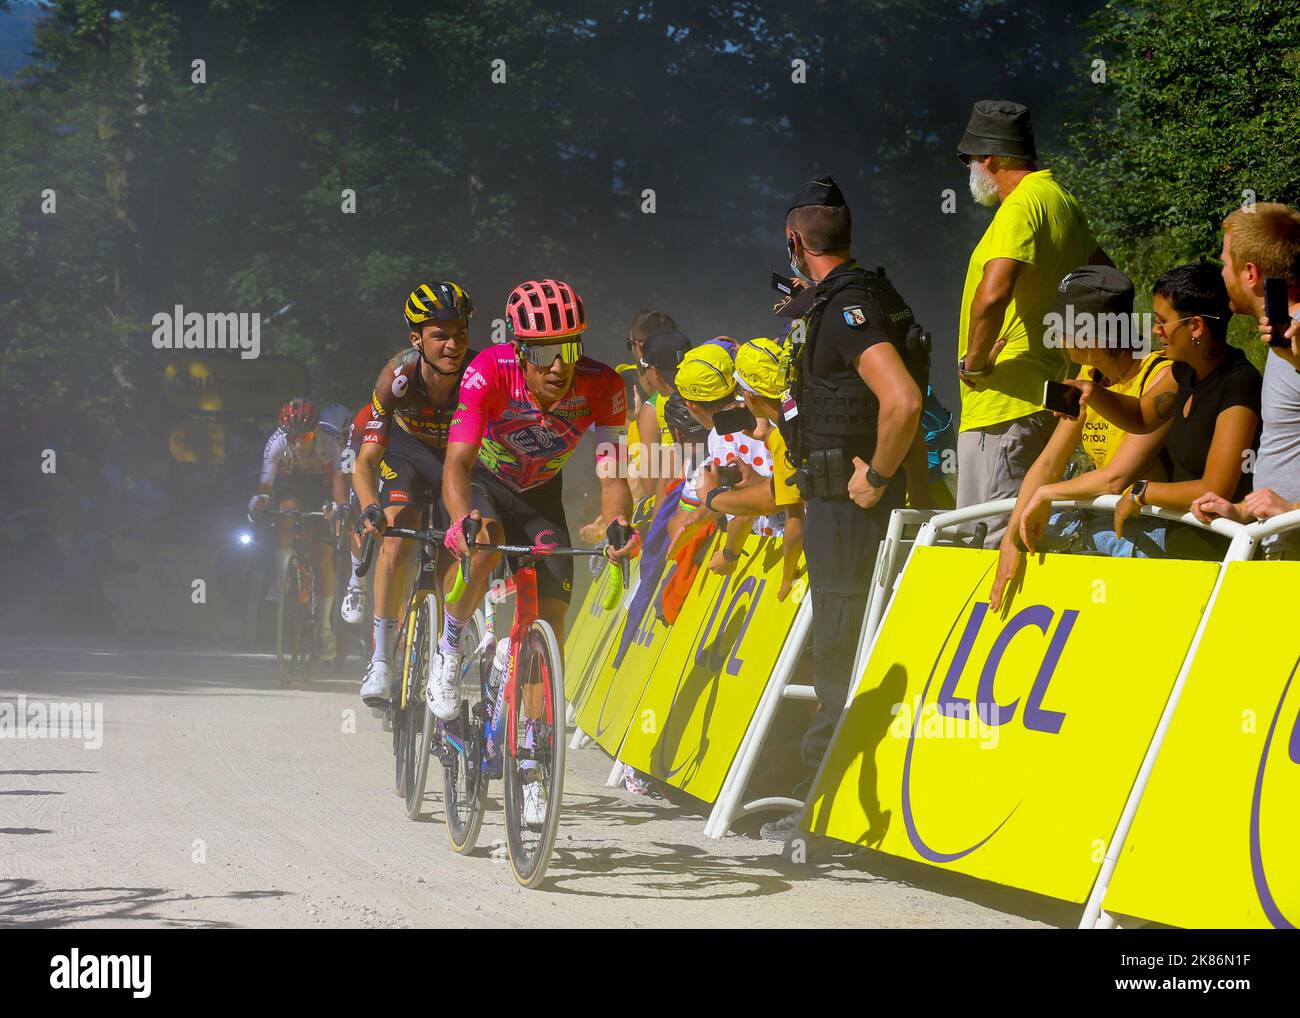 Rigoberto URÃN and Sepp Kuss during Tour De France, Stage 7, France, 8th July 2022, Credit:Chris Wallis/Goding Images/PA Images Stock Photo